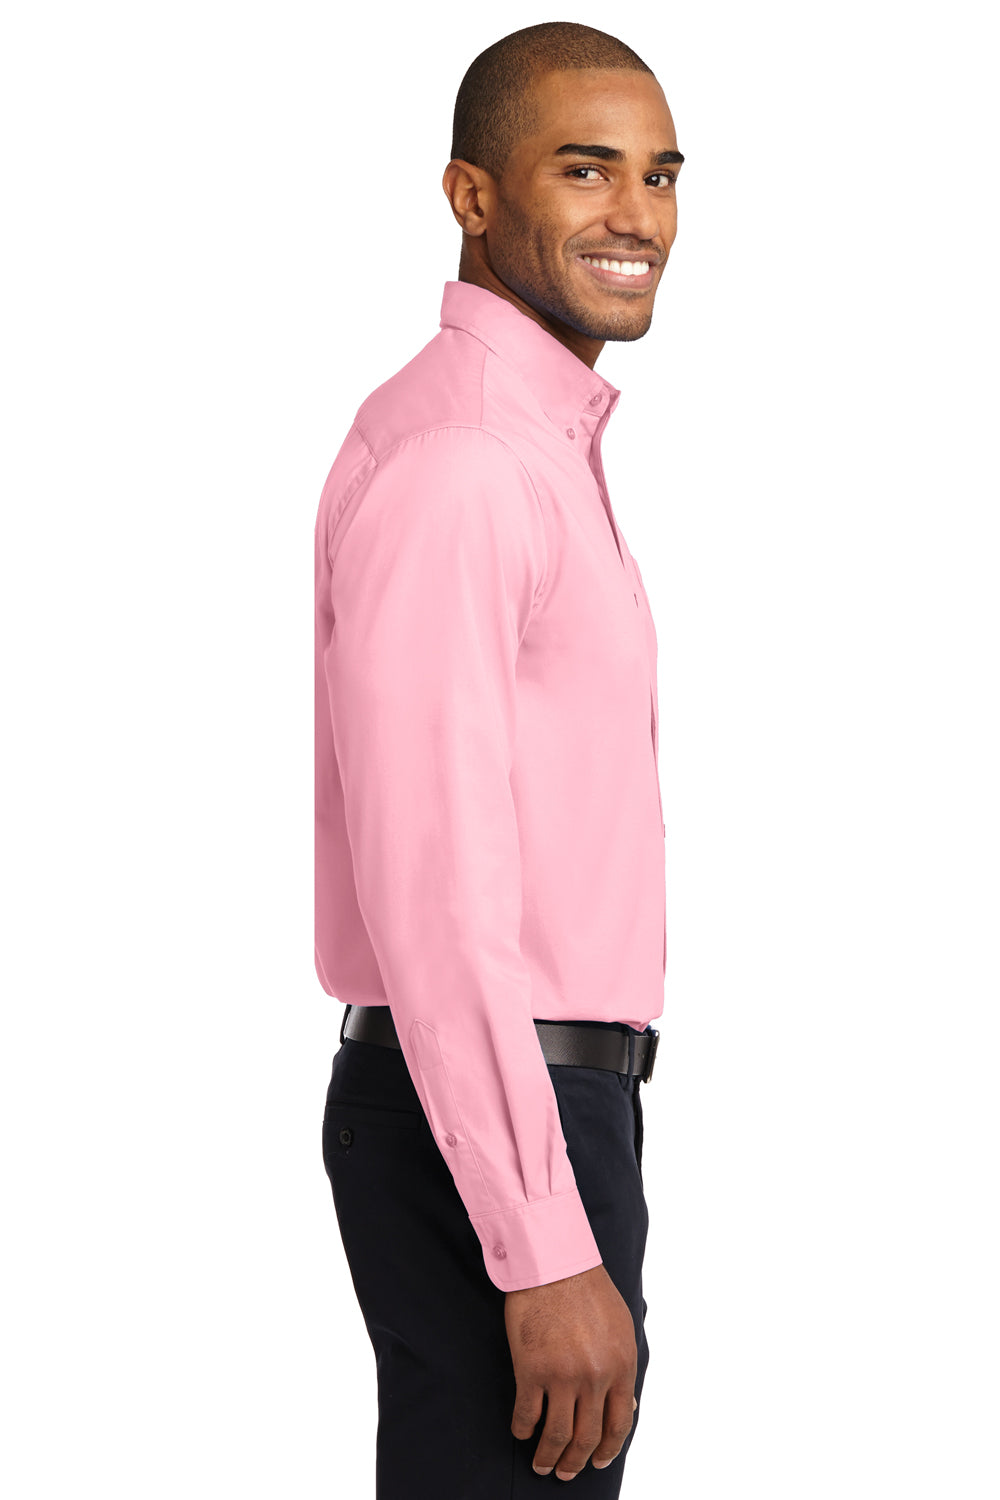 Port Authority S608/TLS608/S608ES Mens Easy Care Wrinkle Resistant Long Sleeve Button Down Shirt w/ Pocket Light Pink Side